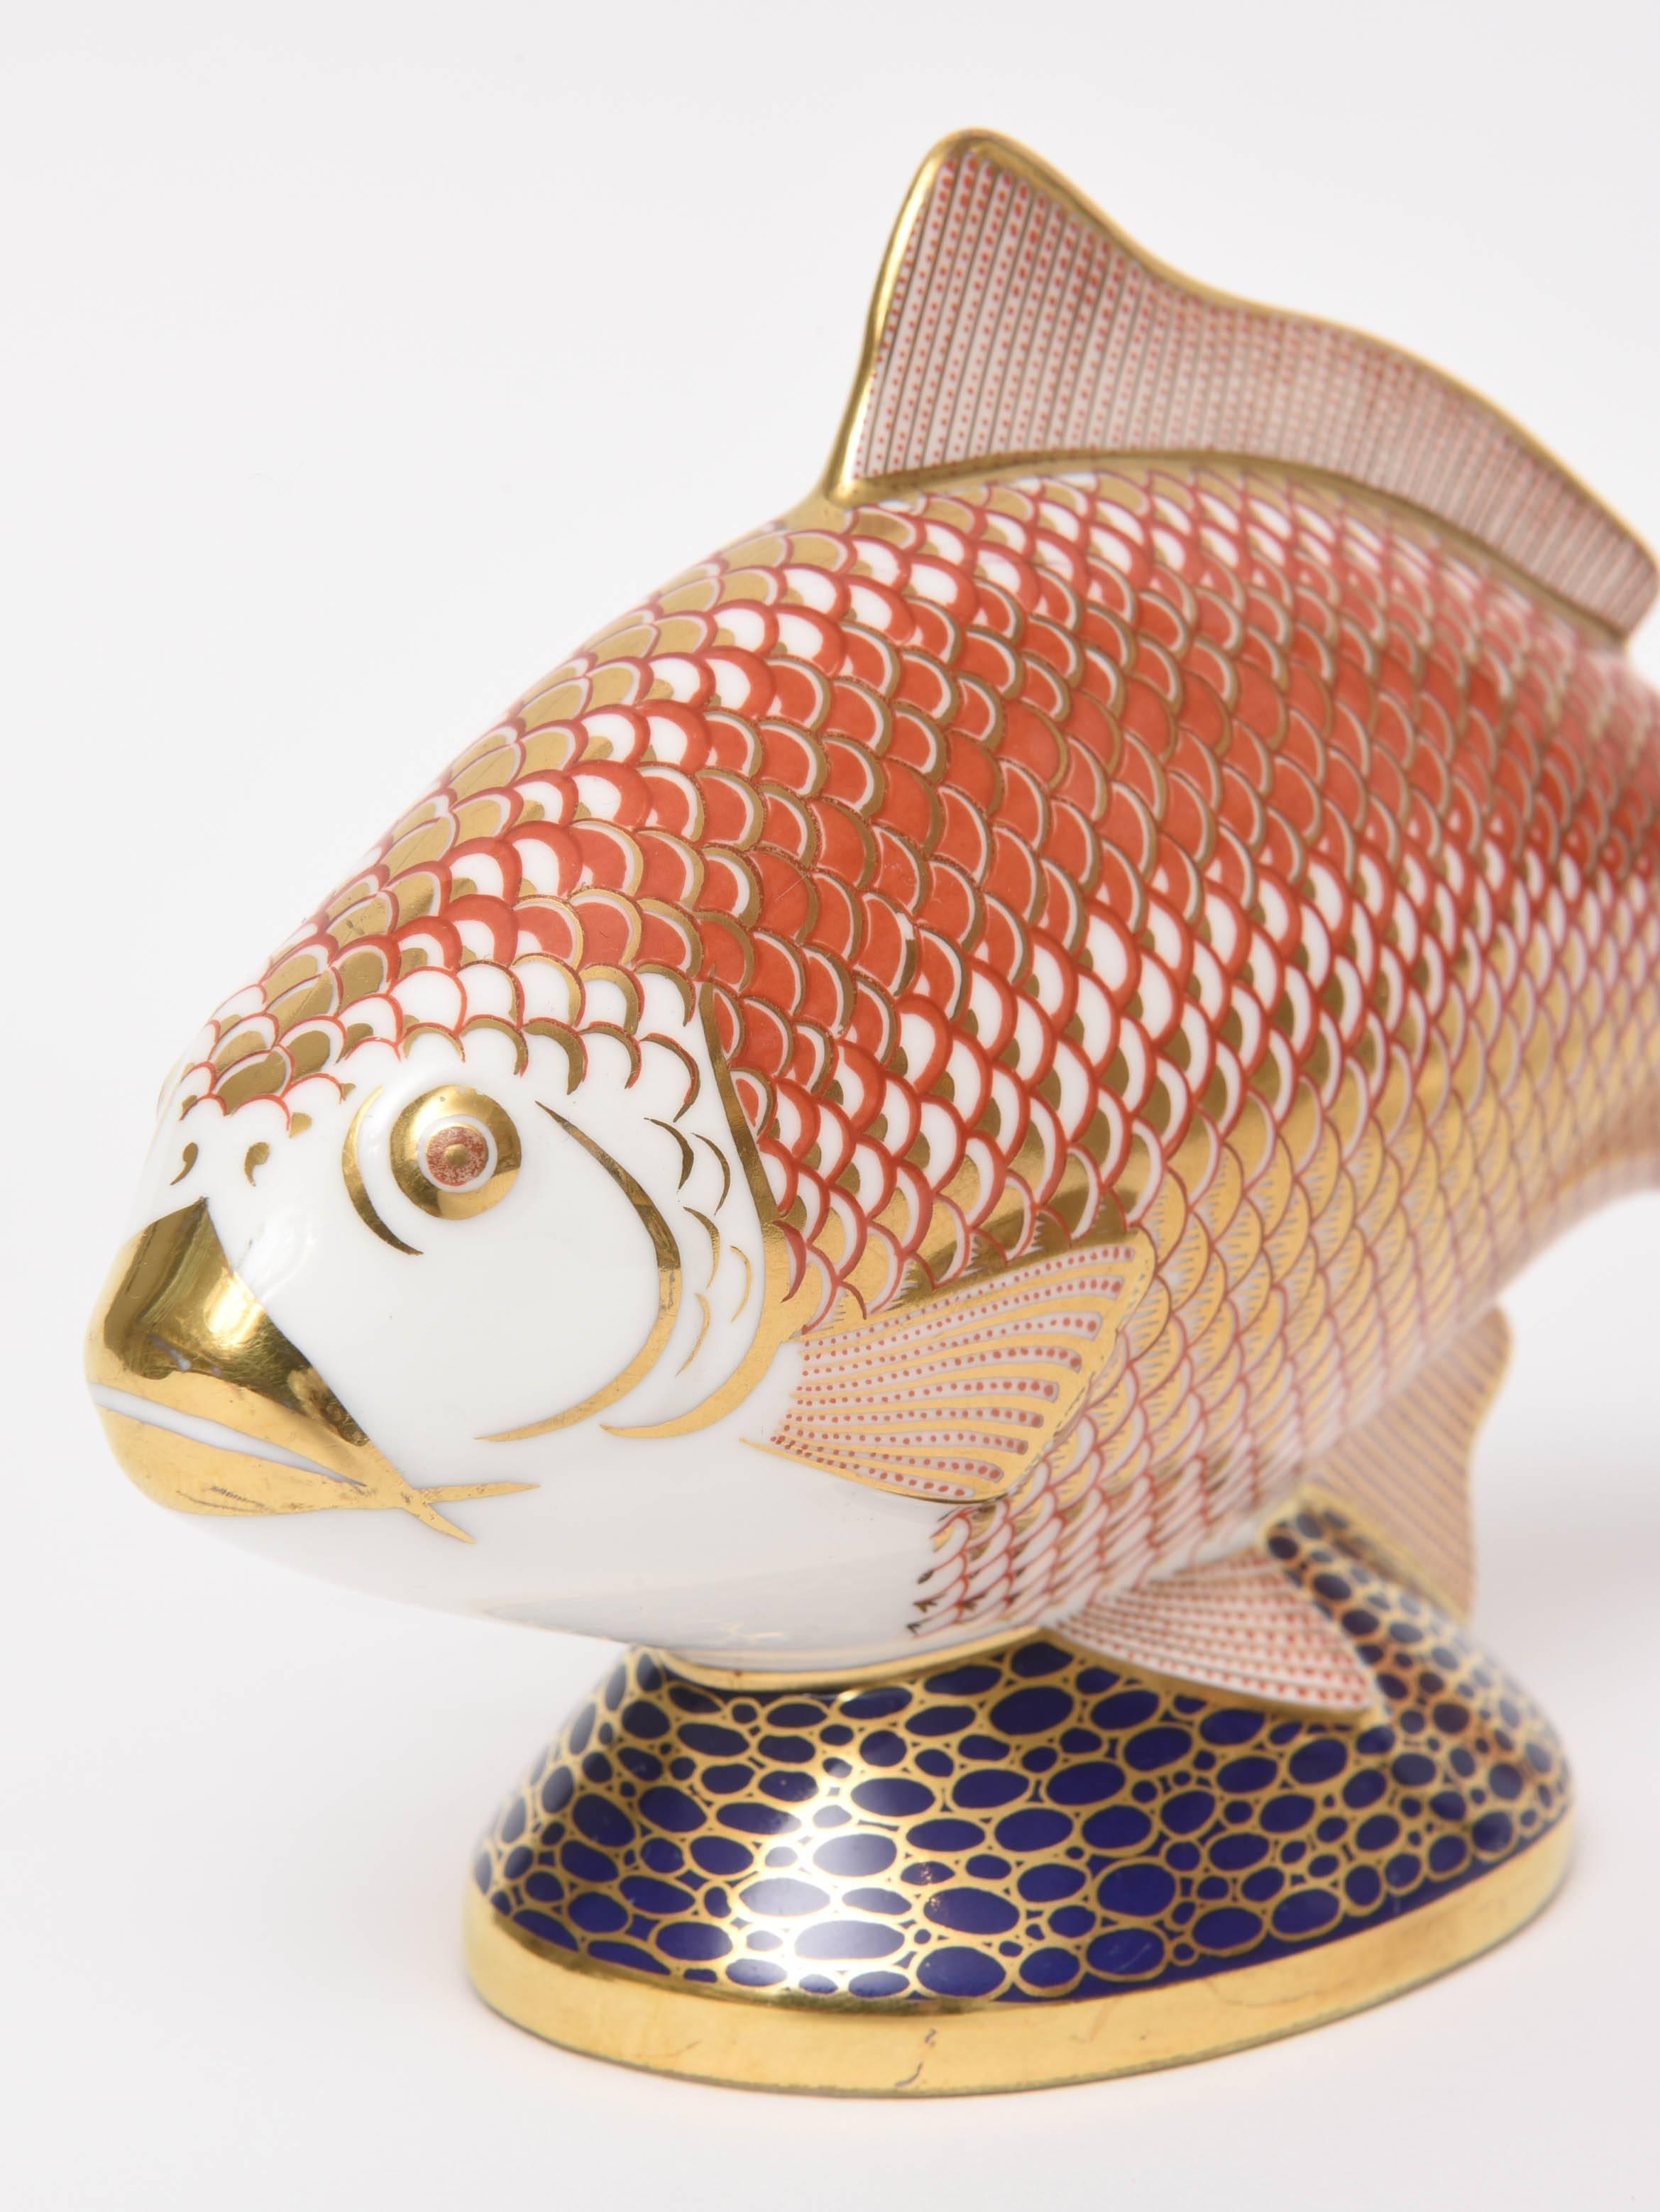 English Royal Crown Derby Imari Color Whimsical Fish Paperweight/Table Ornament